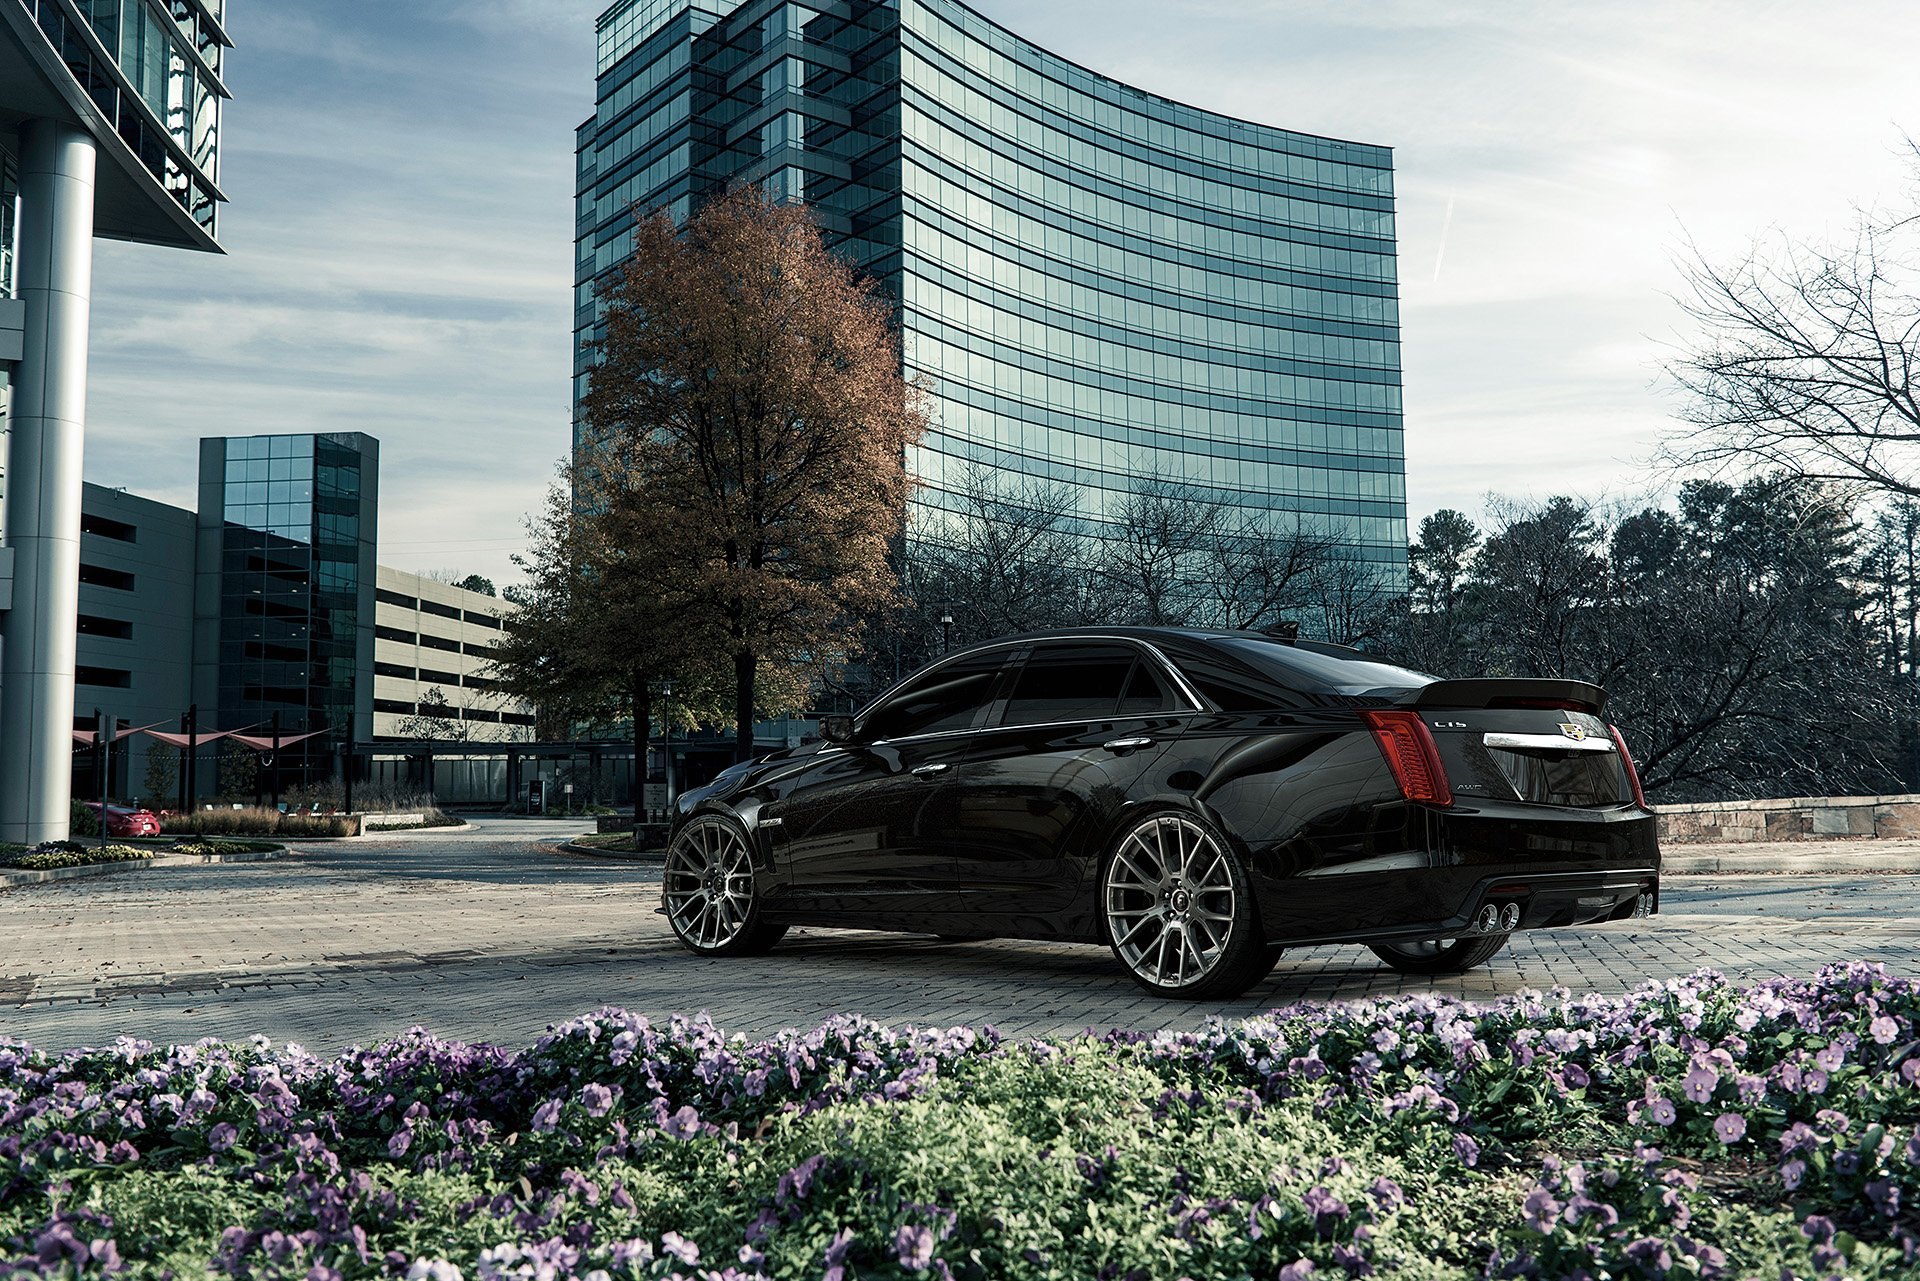 Black Cadillac CTS with Custom Style Rear Spoiler - Photo by Forgiato